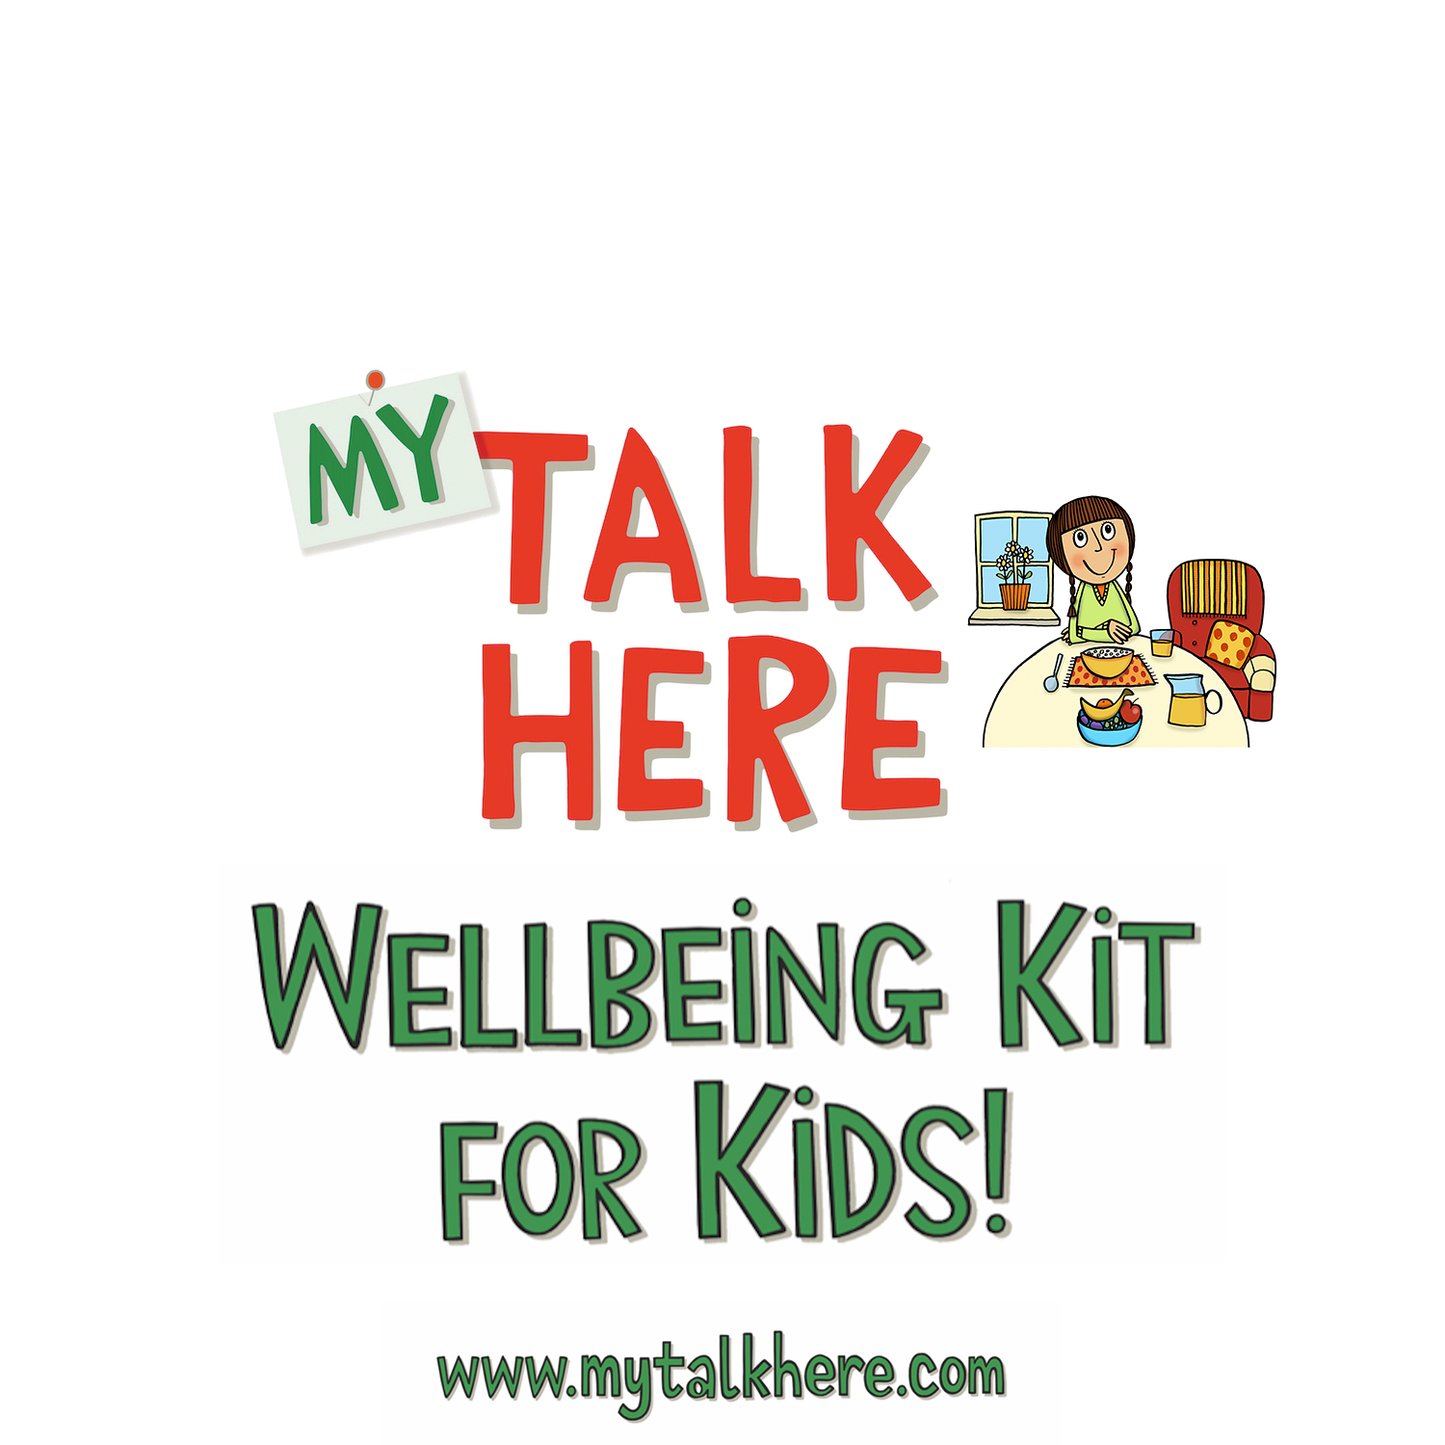 WELLBEING KIT FOR KIDS! (Professional Licence)